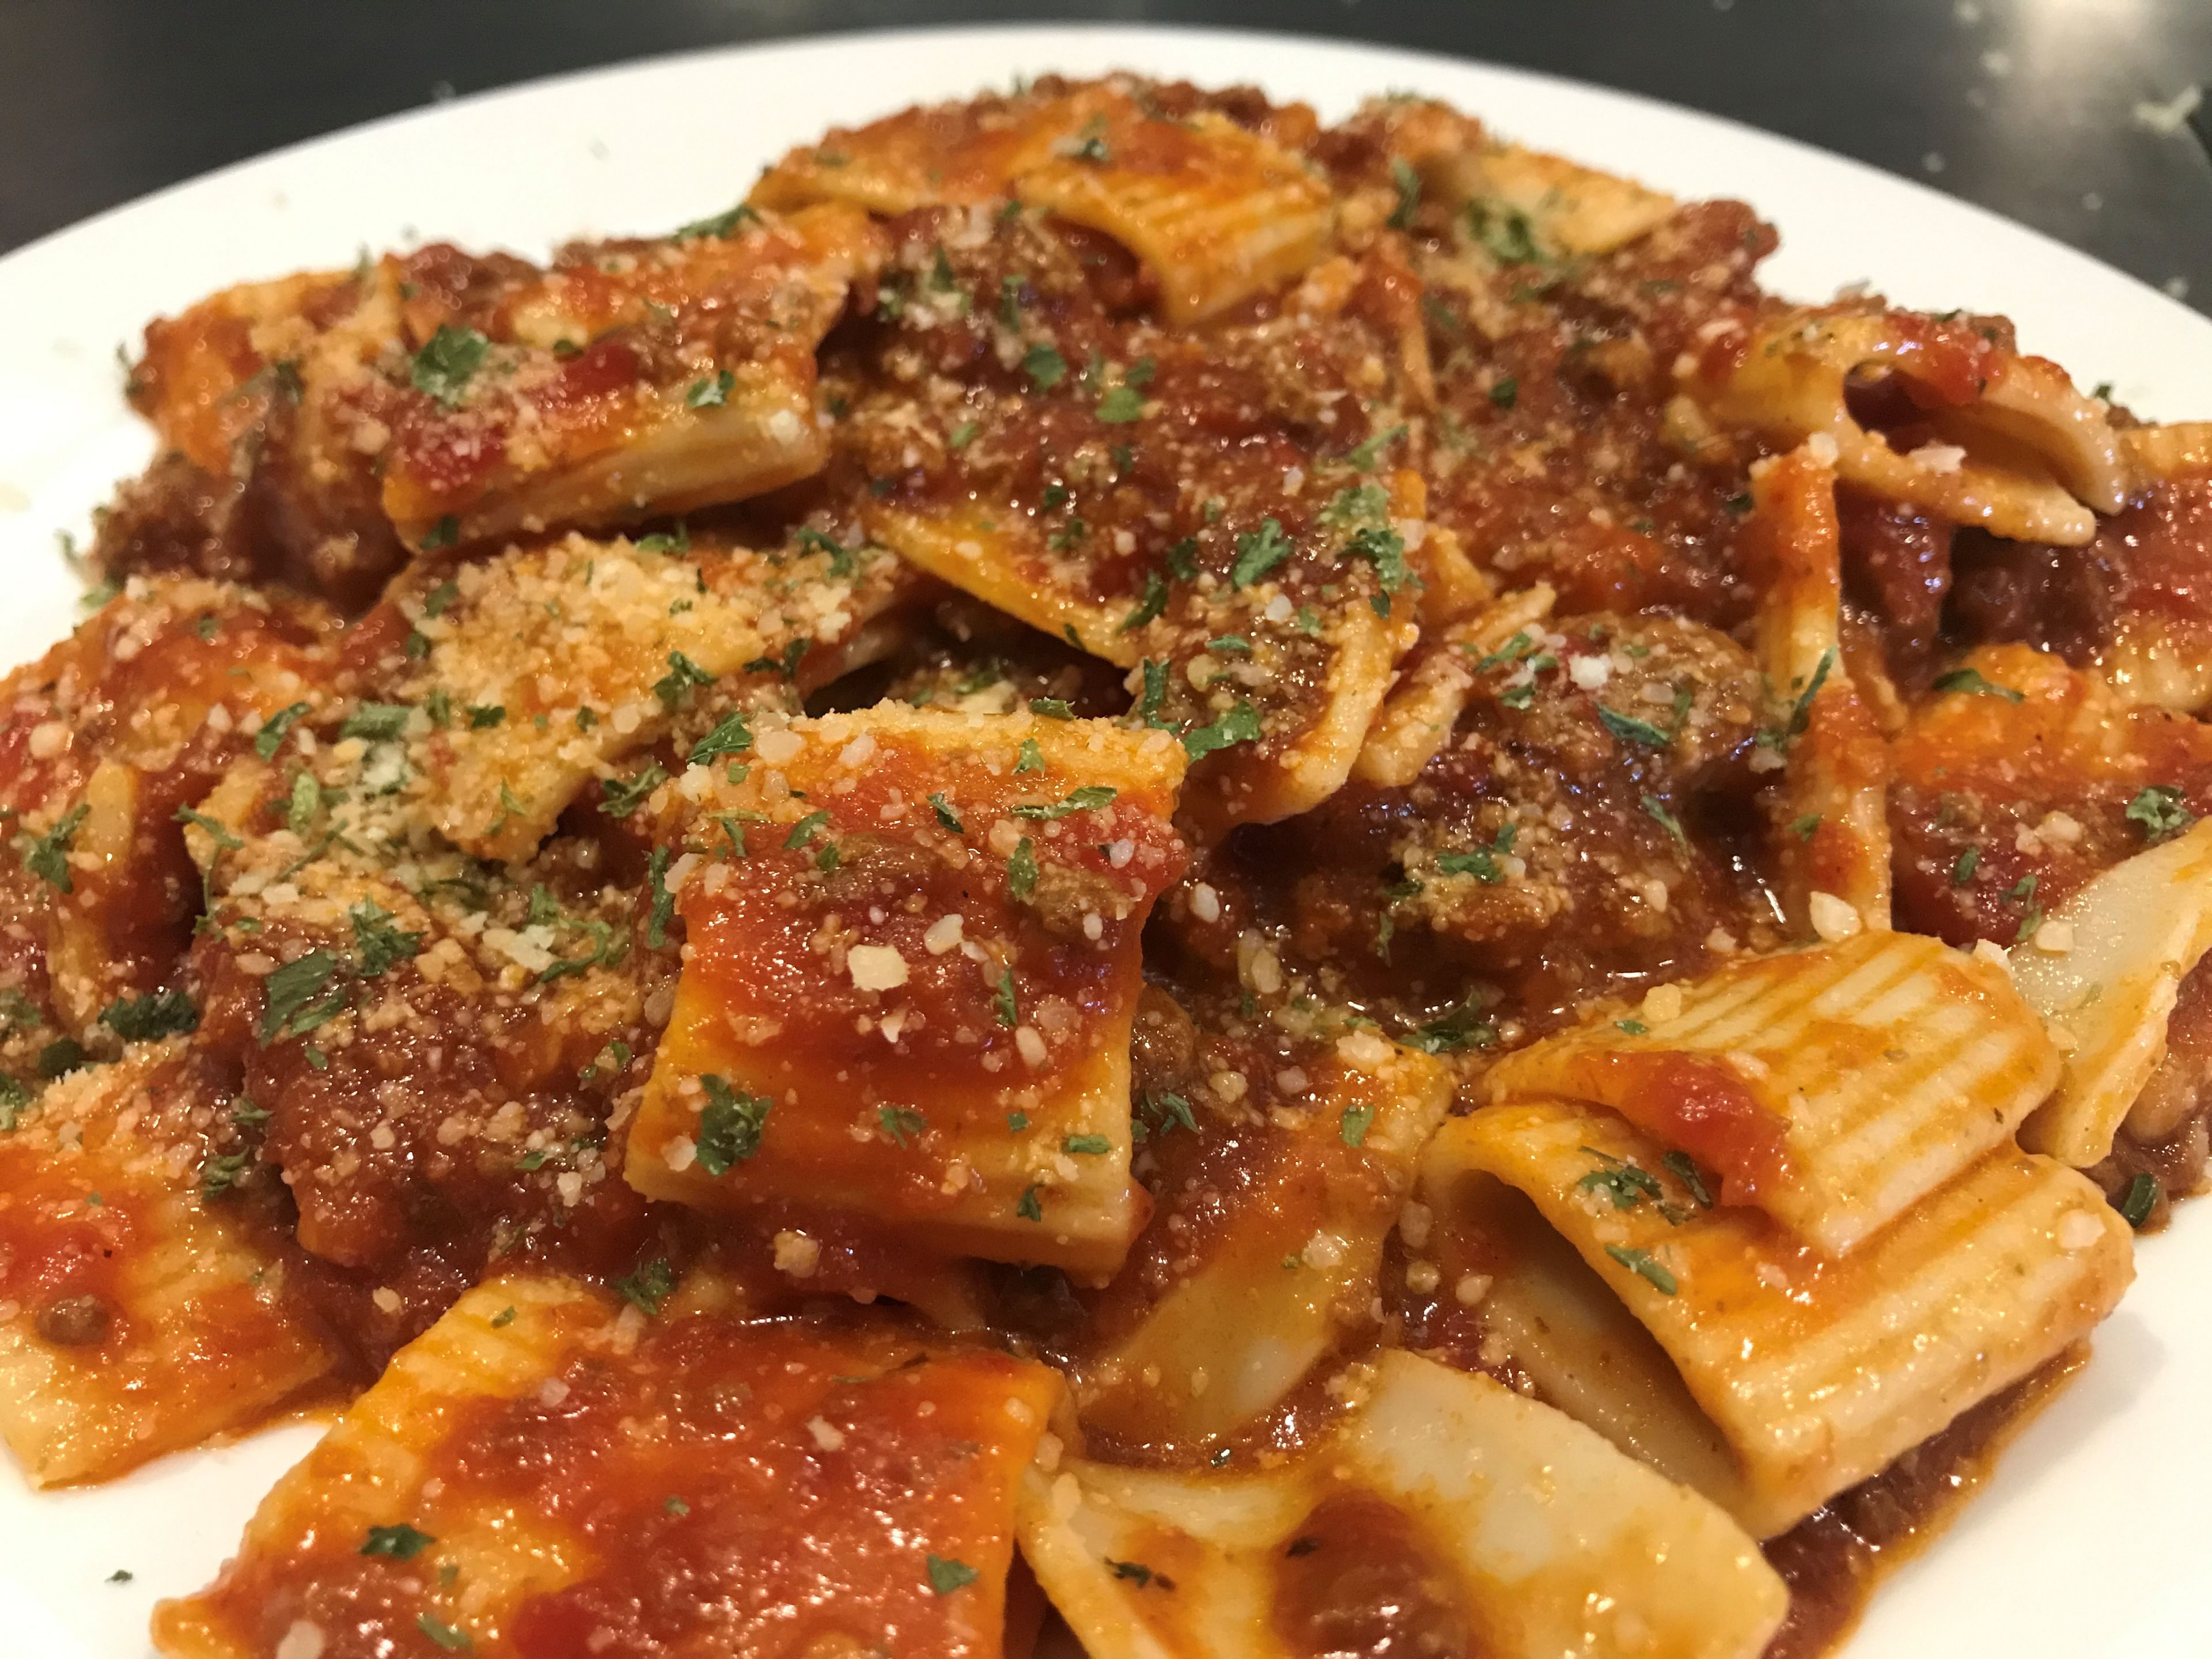 Rigatoni with Hearty Meat Sauce